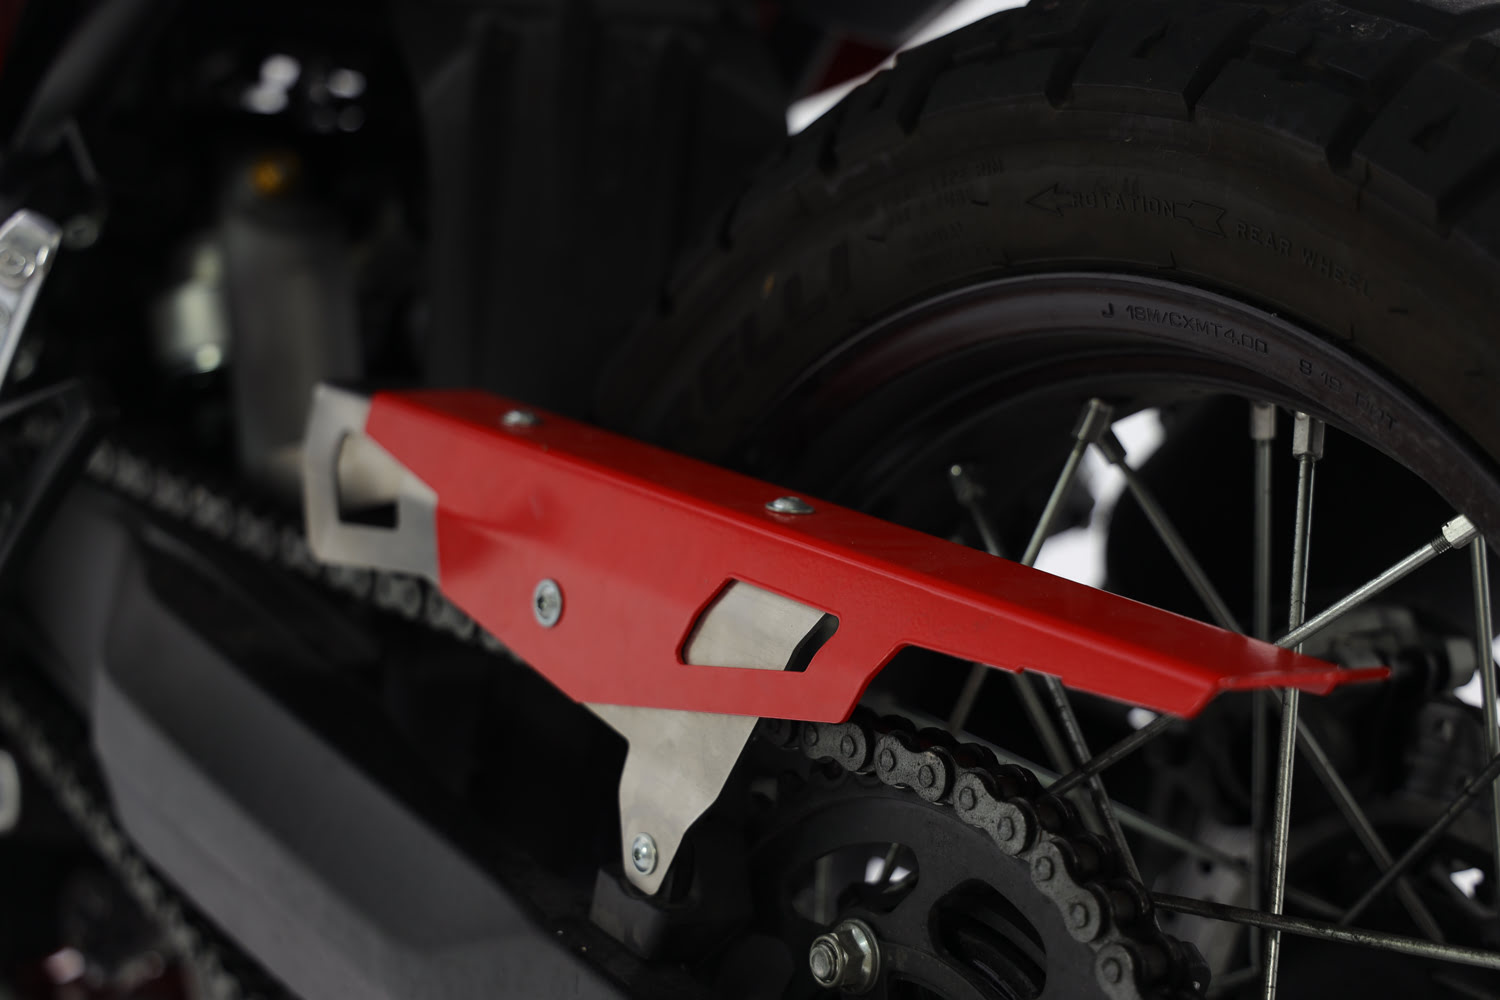 Chain Guard Brushed stainless steel / Red - 2CP21400550714.JPG